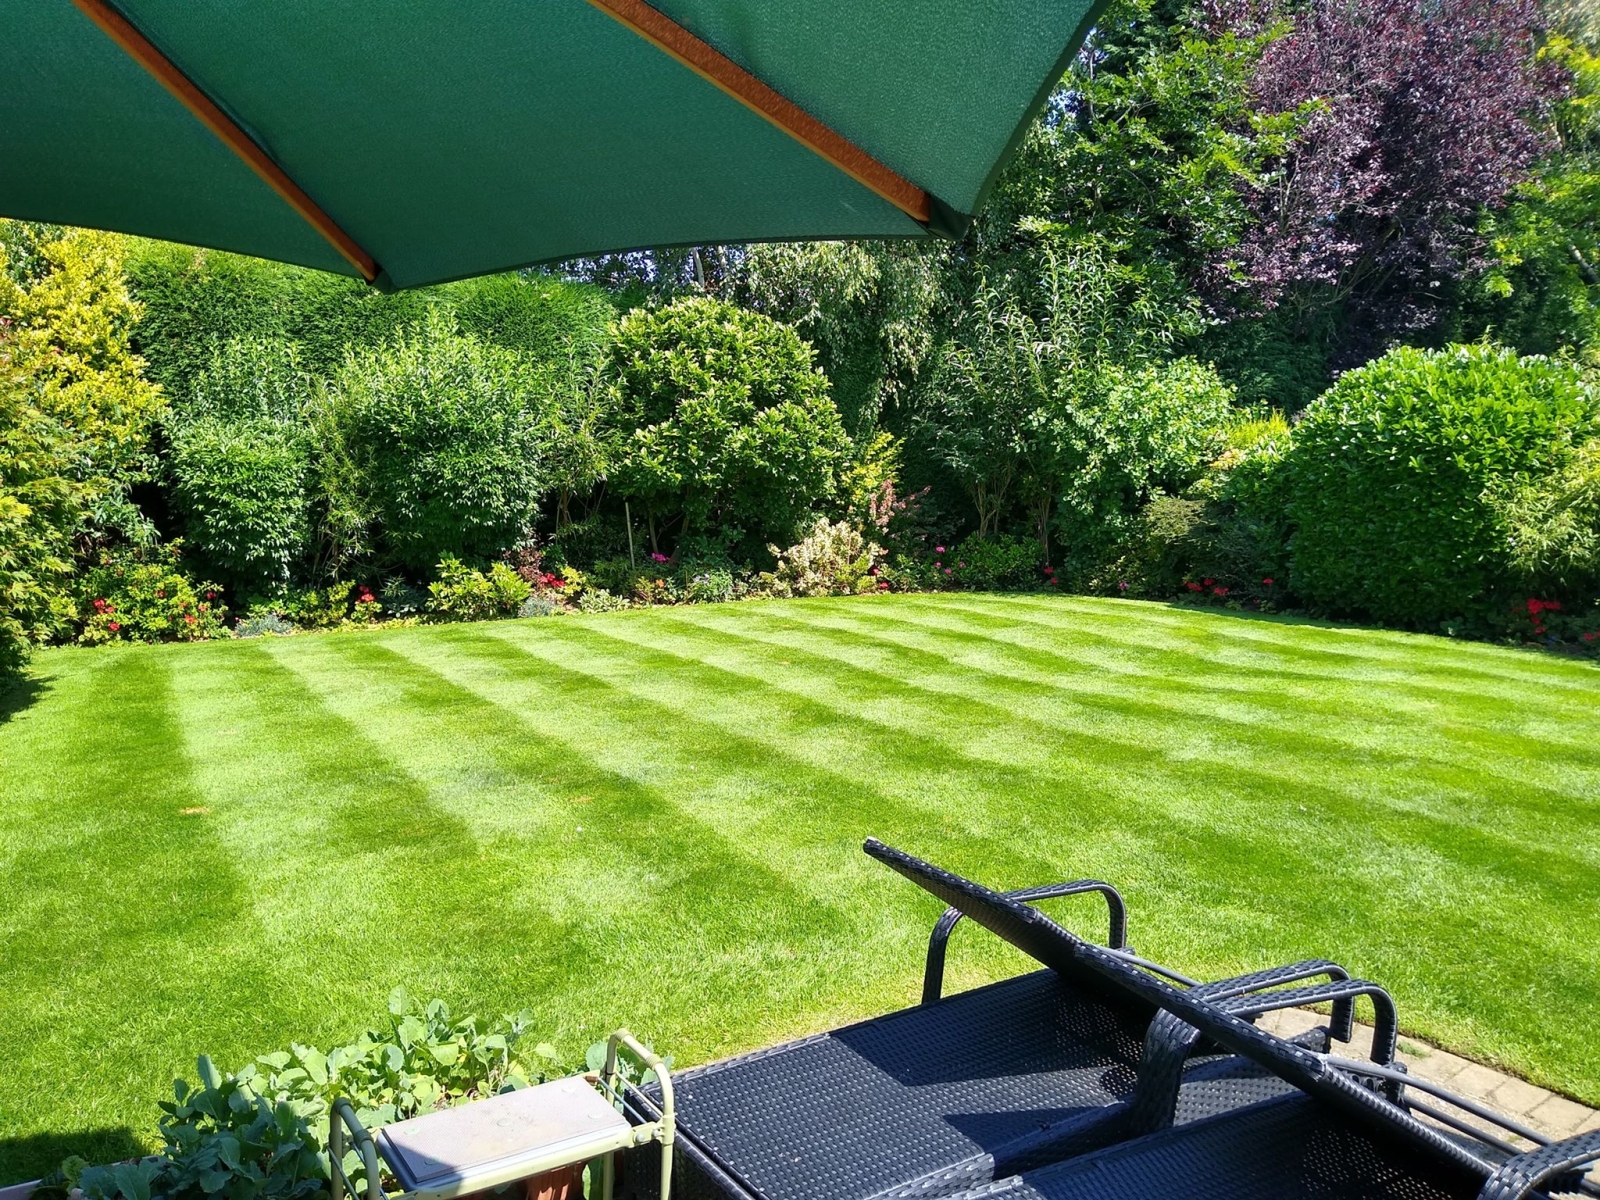 This image is of a lovely rear garden which is thriving with our lawn care services with the colour and thickness of the grass. There are trees to the rear making this a an amazing lawn. It has been mown in two directions giving a striped effect